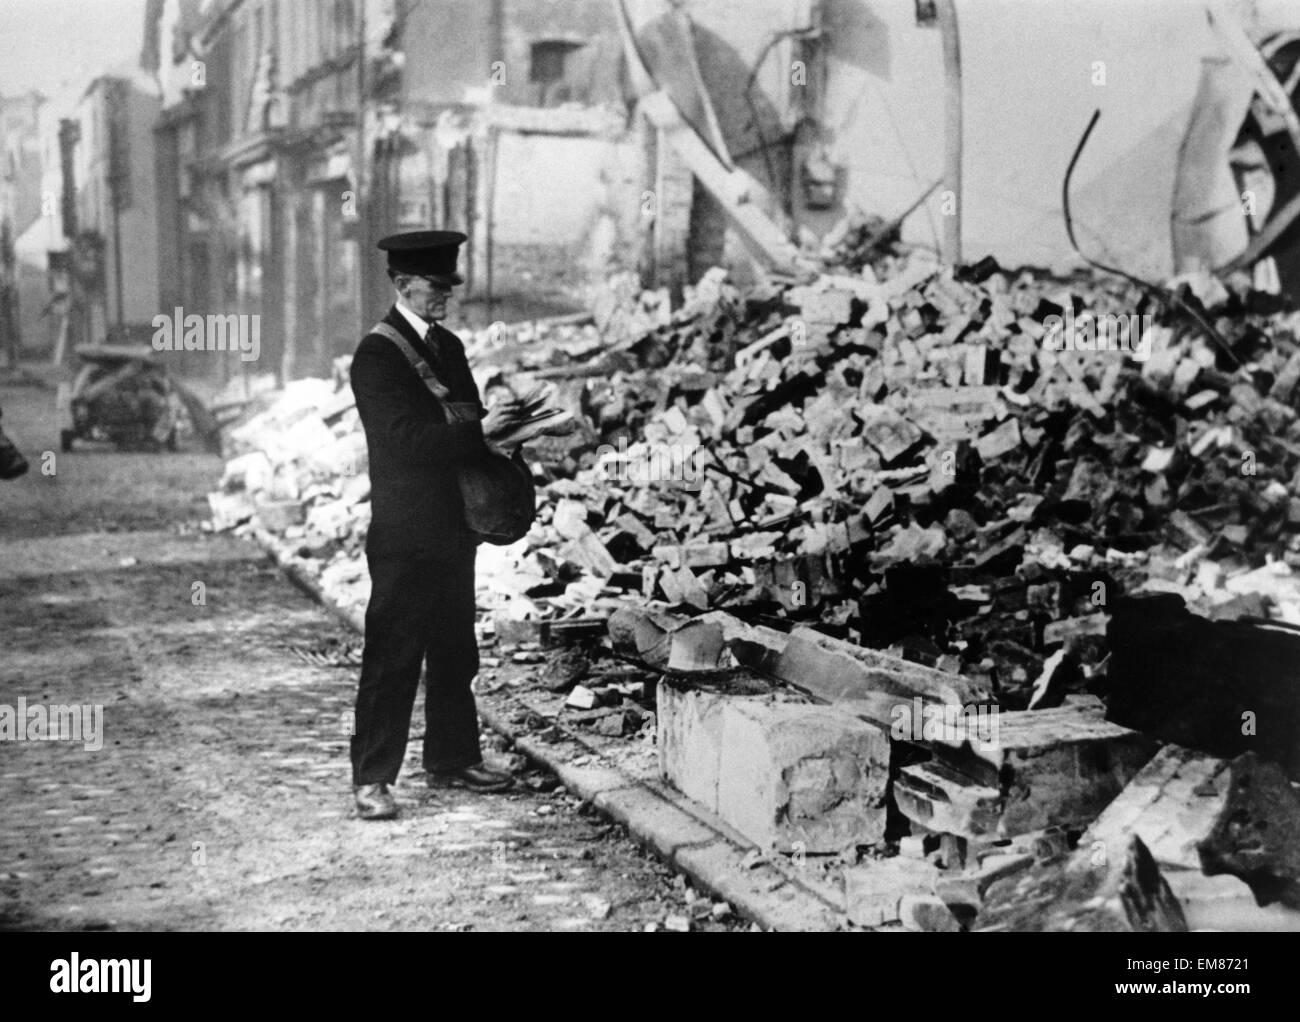 Smithford Street looking towards Fleet Street in Coventry after an air raid by the German Luftwaffe in World Wat Two. St. John's church can just be made out on the top left of the photo. This postman is struggling to decide what to do with the mail for businesses that were raized to the ground during the Coventry blitz of 14th November 1940. Stock Photo